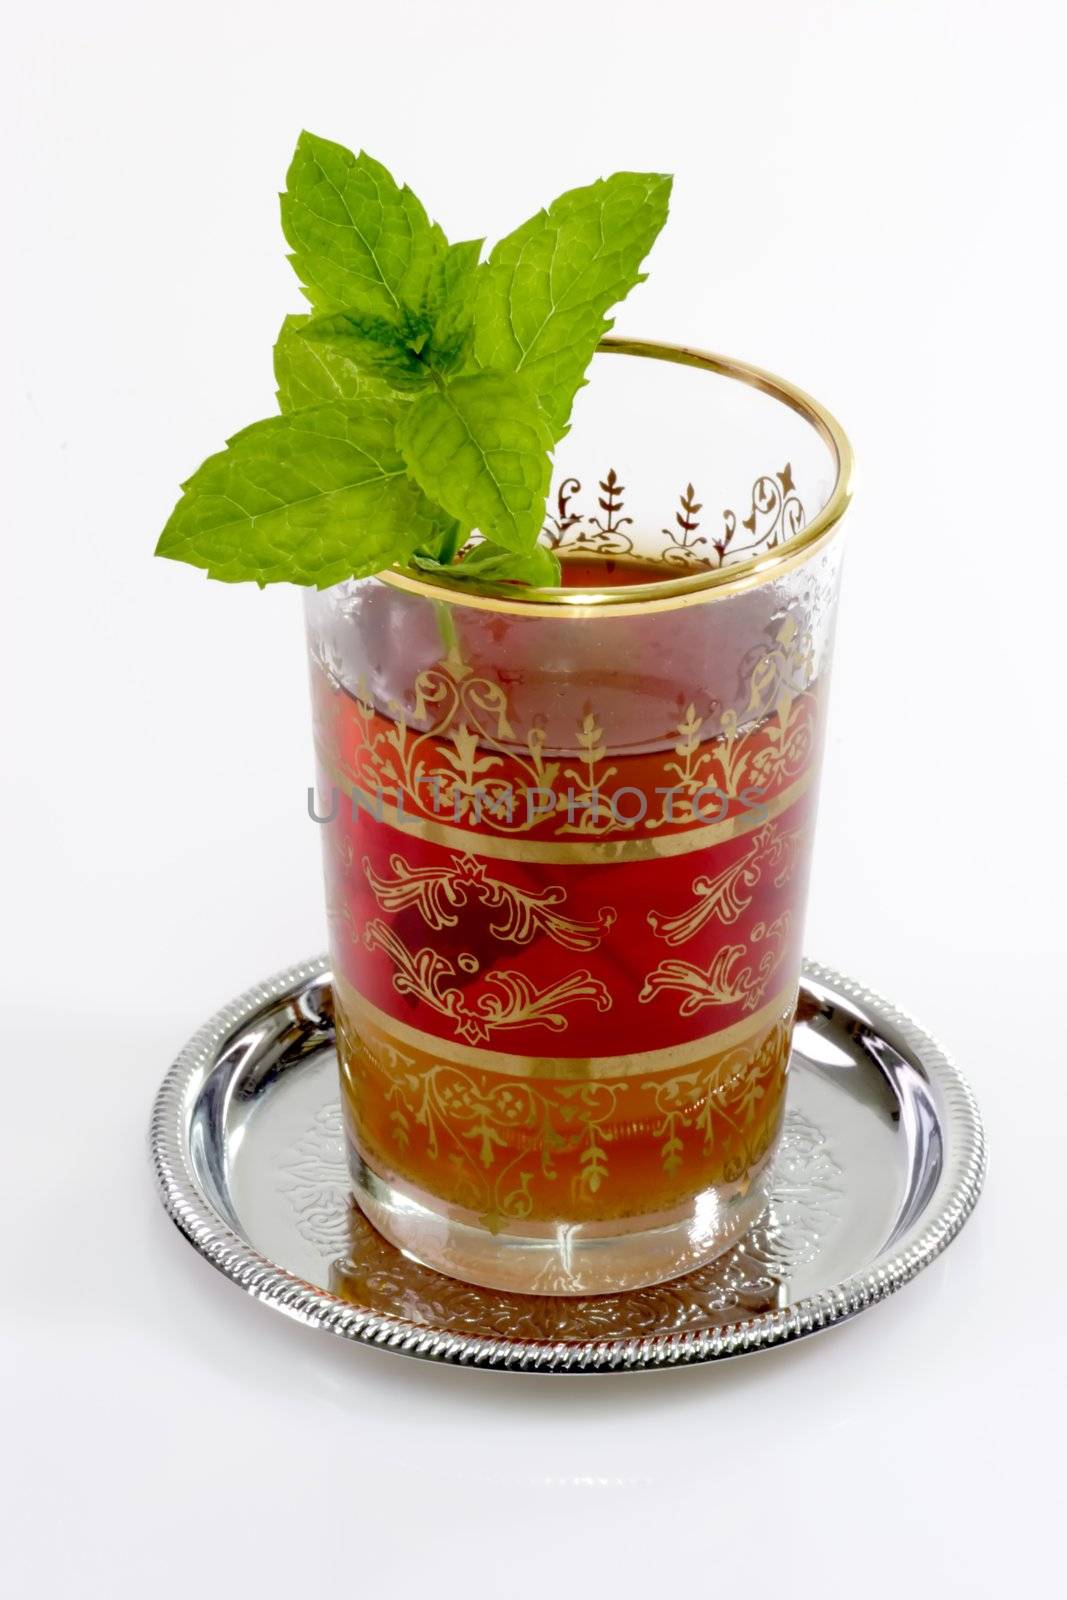 Marroccan Tea with Mint by Teamarbeit